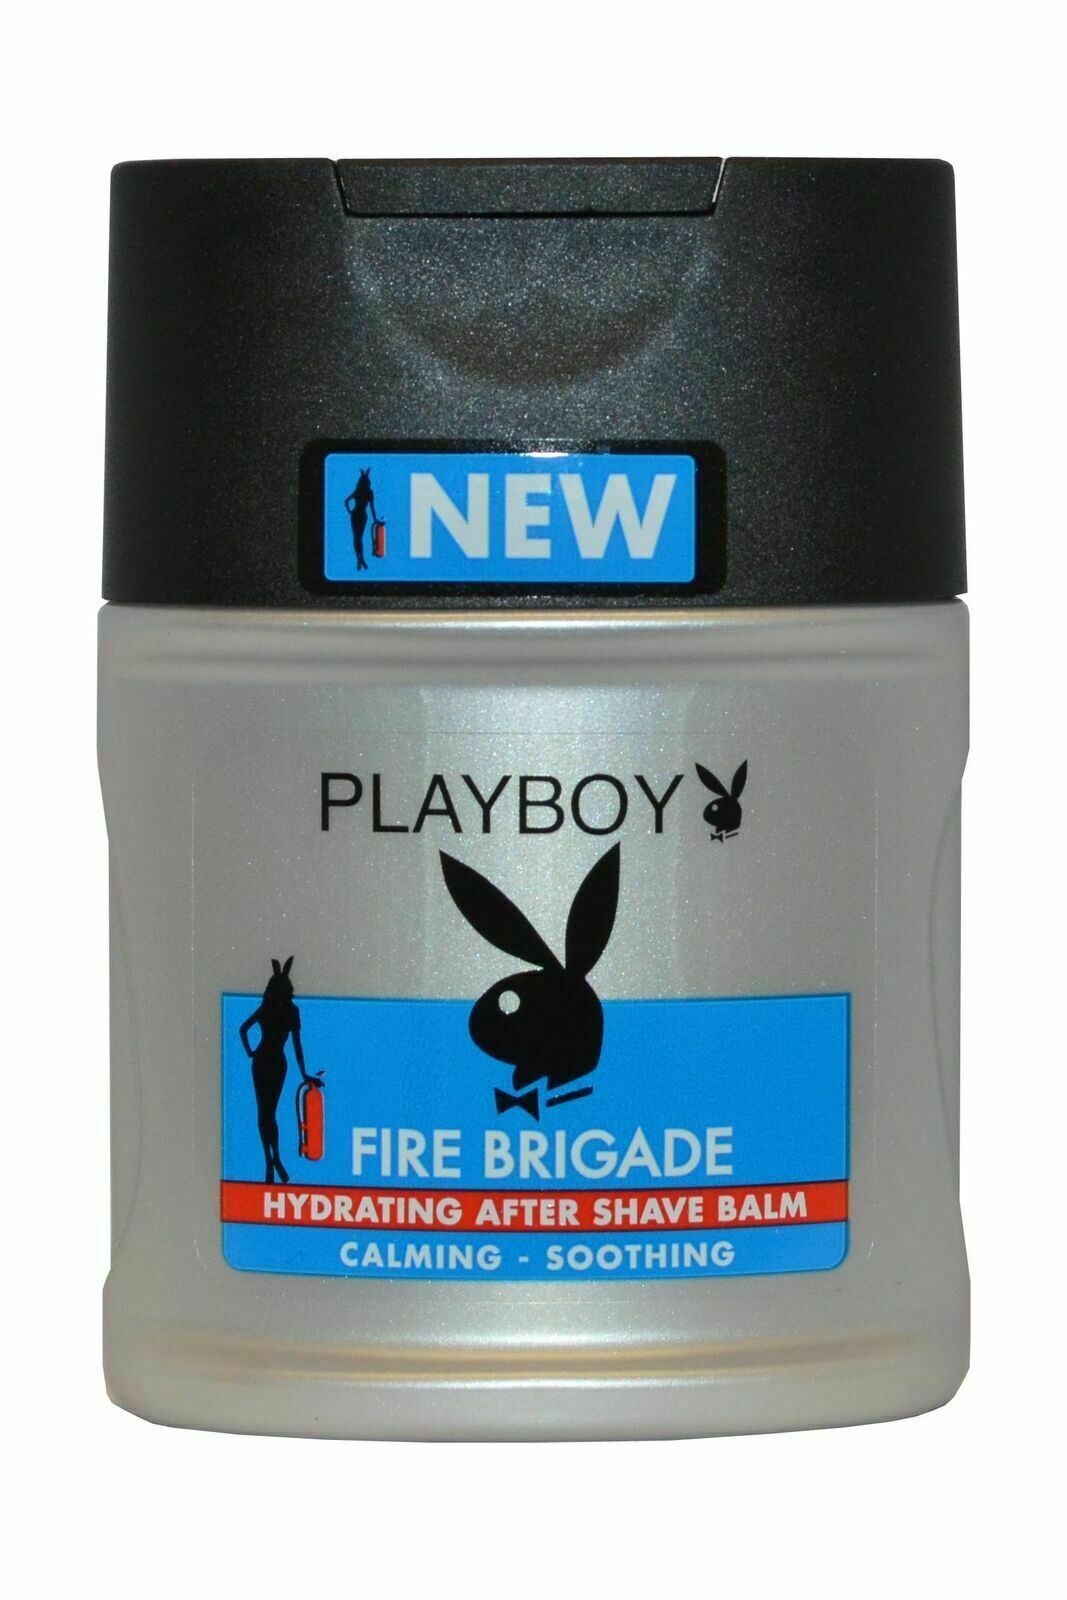 Playboy Fire Brigade Hydrating After Shave Balm 100ml RRP 4.99 CLEARANCE XL 3.99